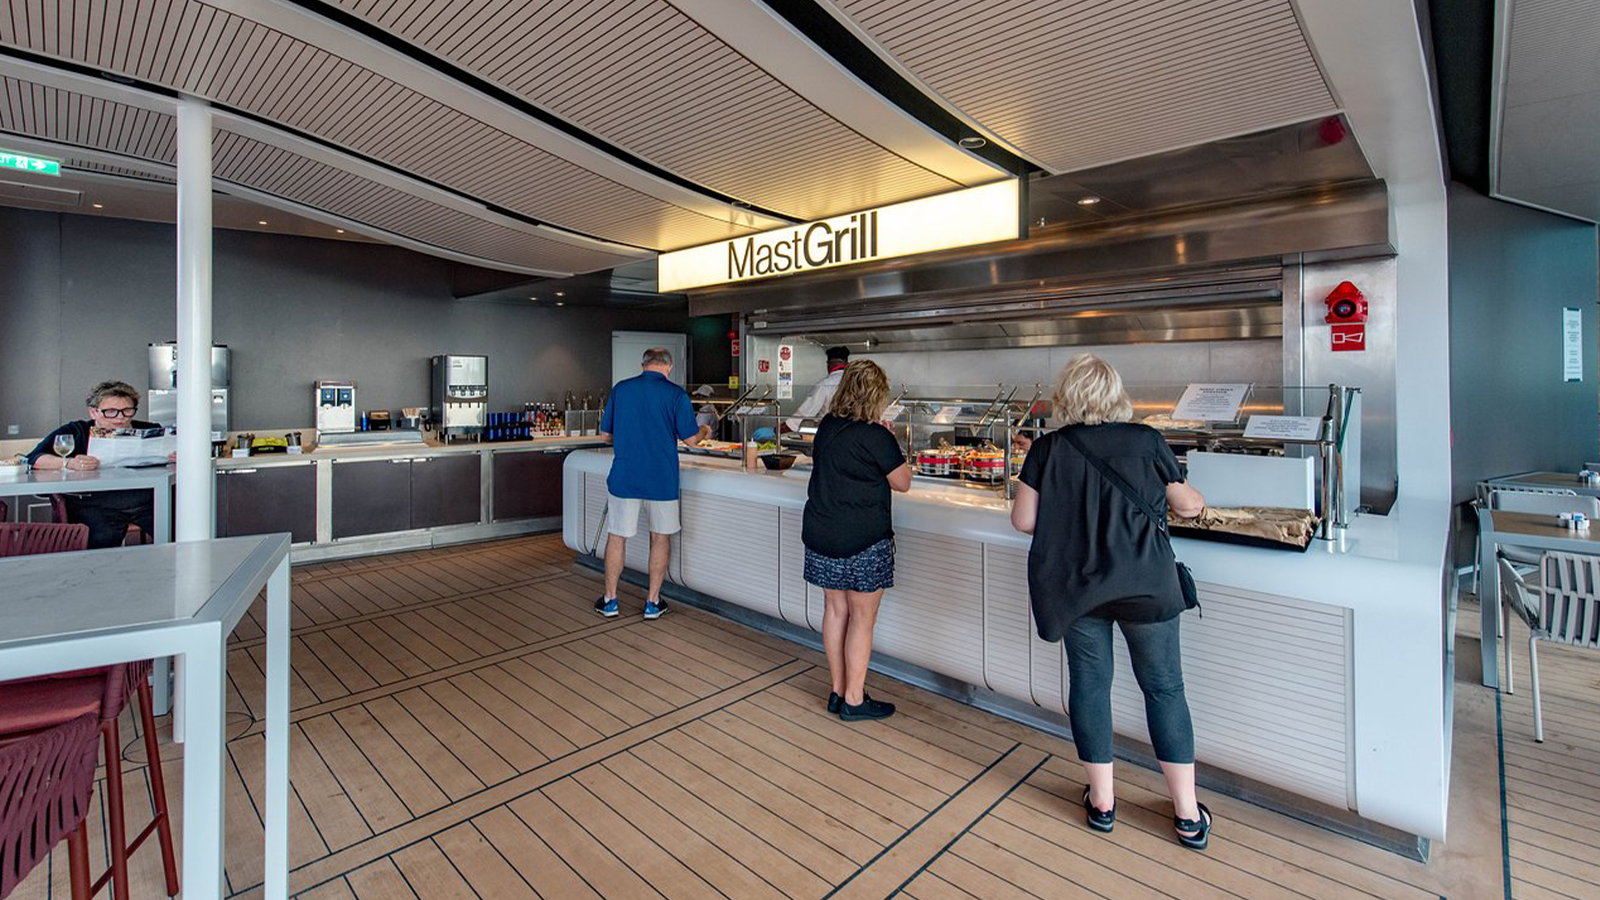 Mast Grill on the Celebrity Solstice